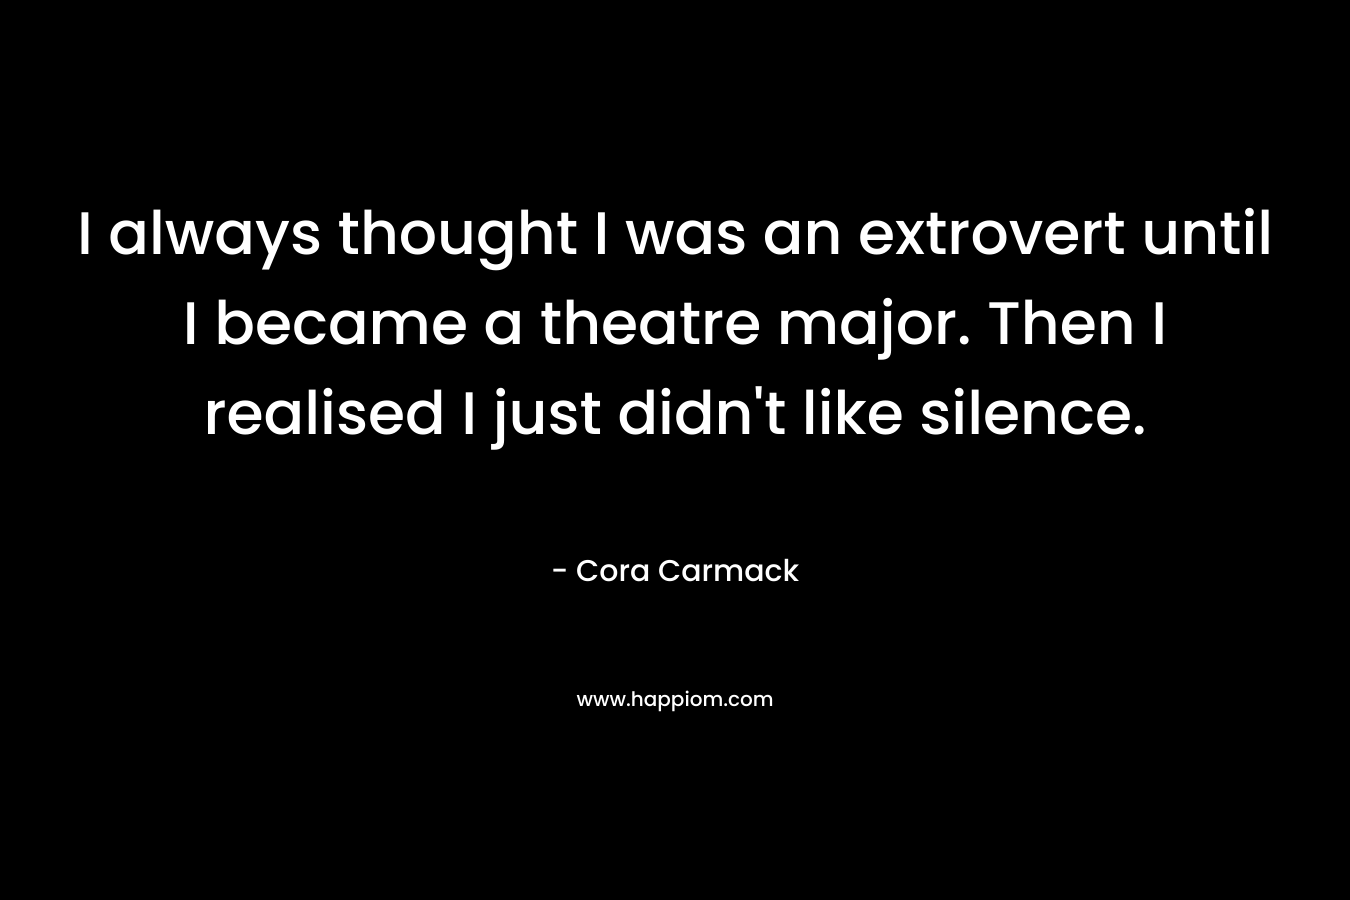 I always thought I was an extrovert until I became a theatre major. Then I realised I just didn’t like silence. – Cora Carmack